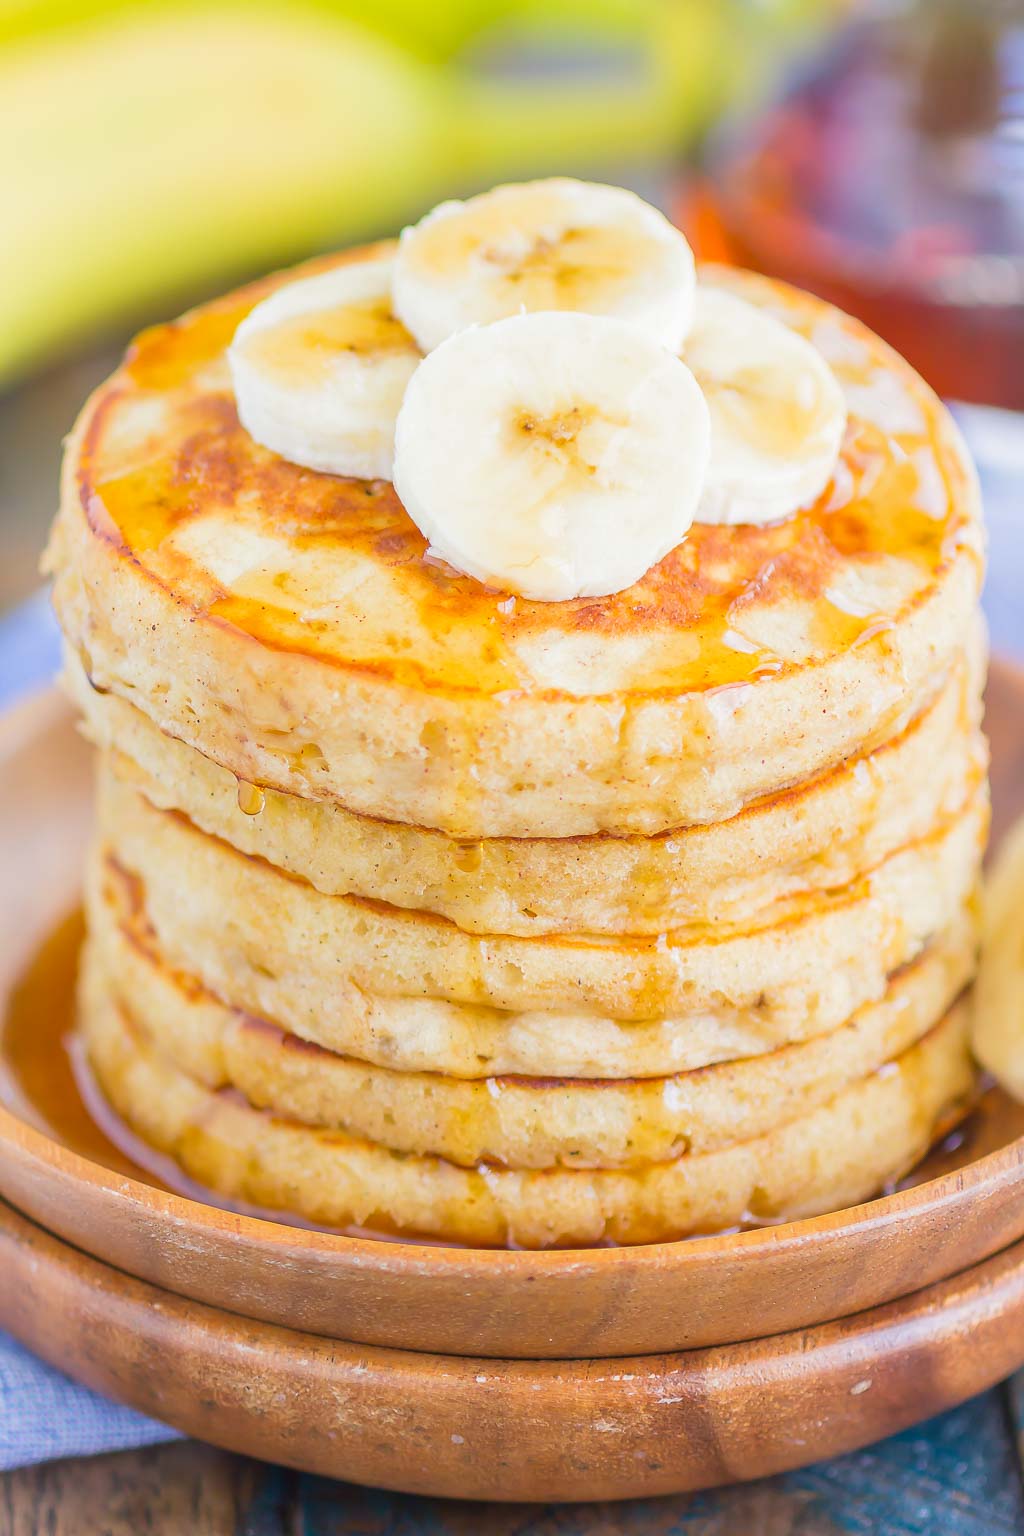 A stack of fluffy Banana Pancakes topped with banana slices and maple syrup on a wooden plate.